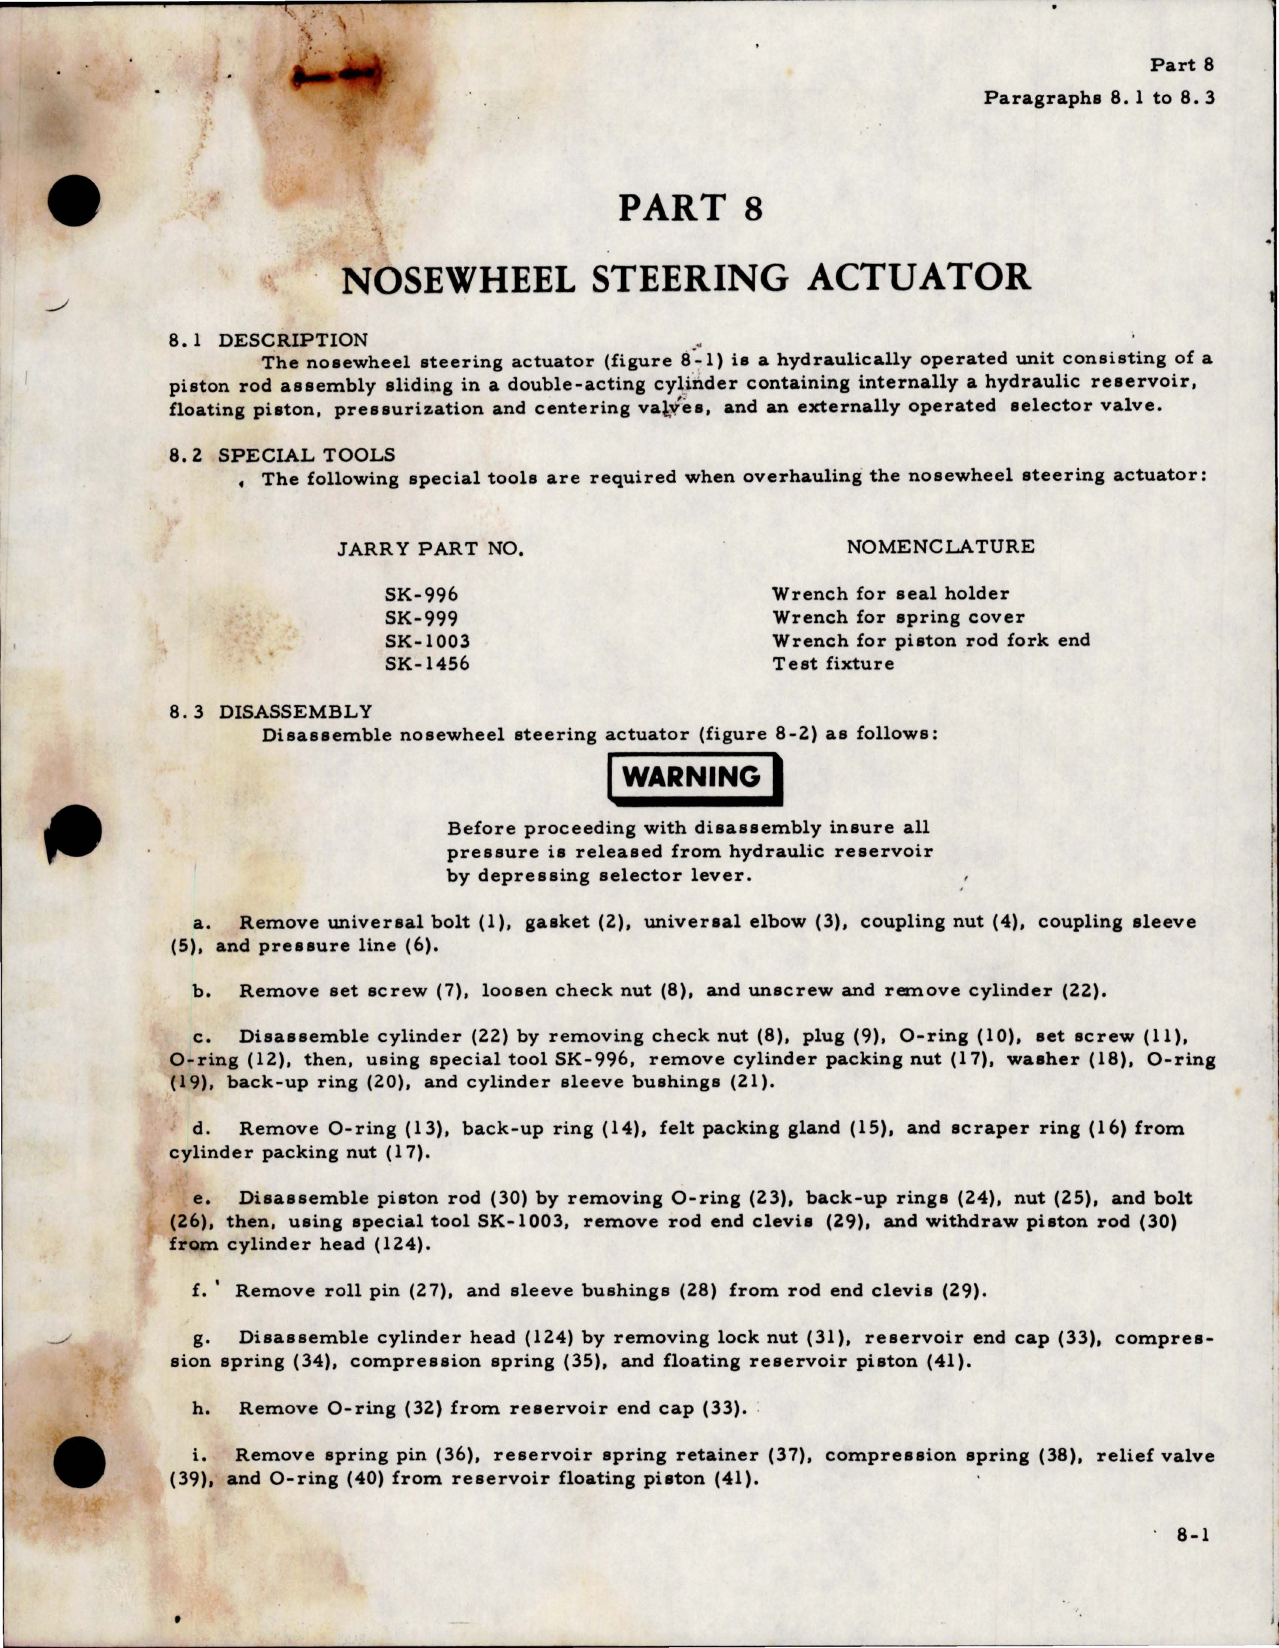 Sample page 1 from AirCorps Library document: Nosewheel Steering Actuator